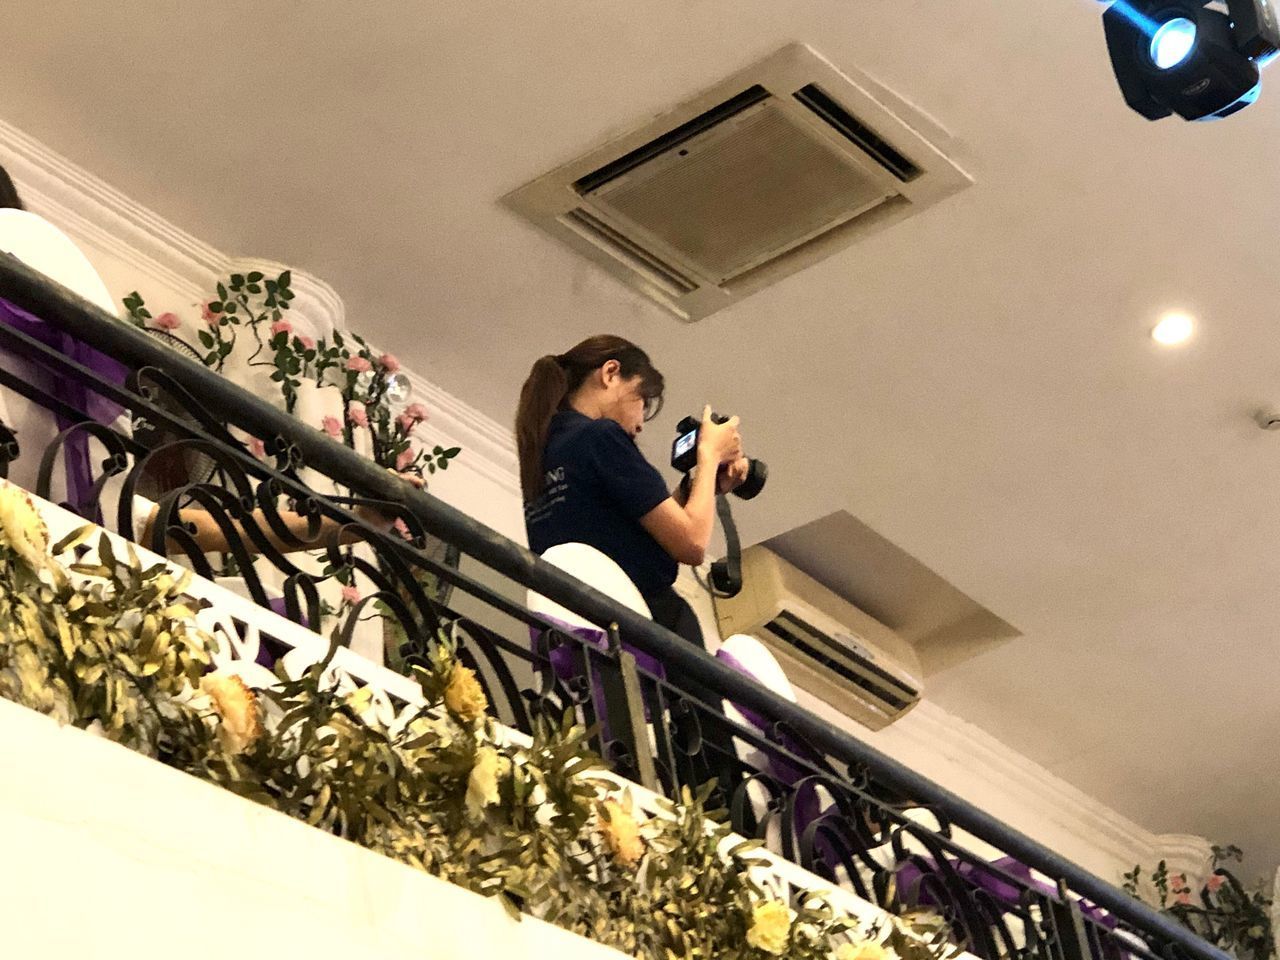 LOW ANGLE VIEW OF WOMAN PHOTOGRAPHING ON ILLUMINATED CEILING AT HOME